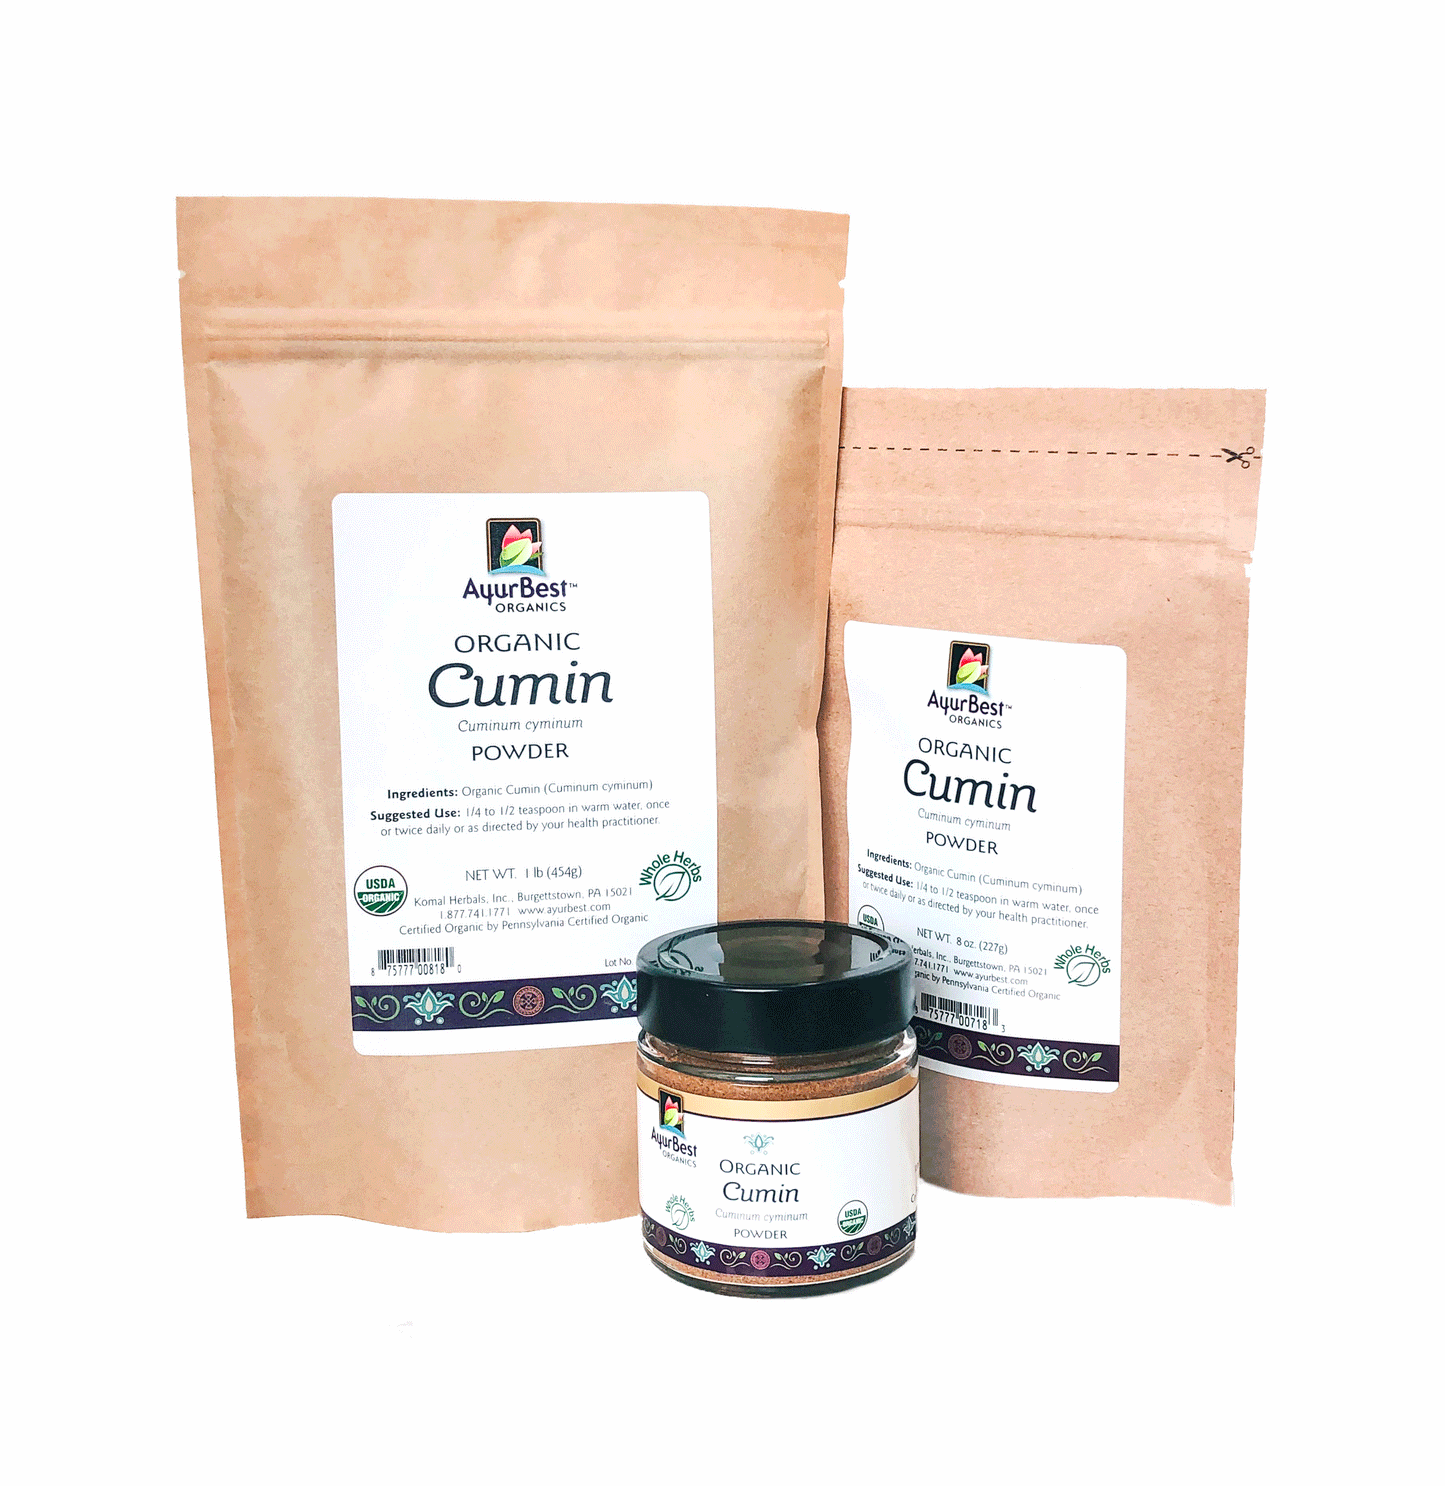 Organic Cumin Seed Powder available in 3 great sizes!